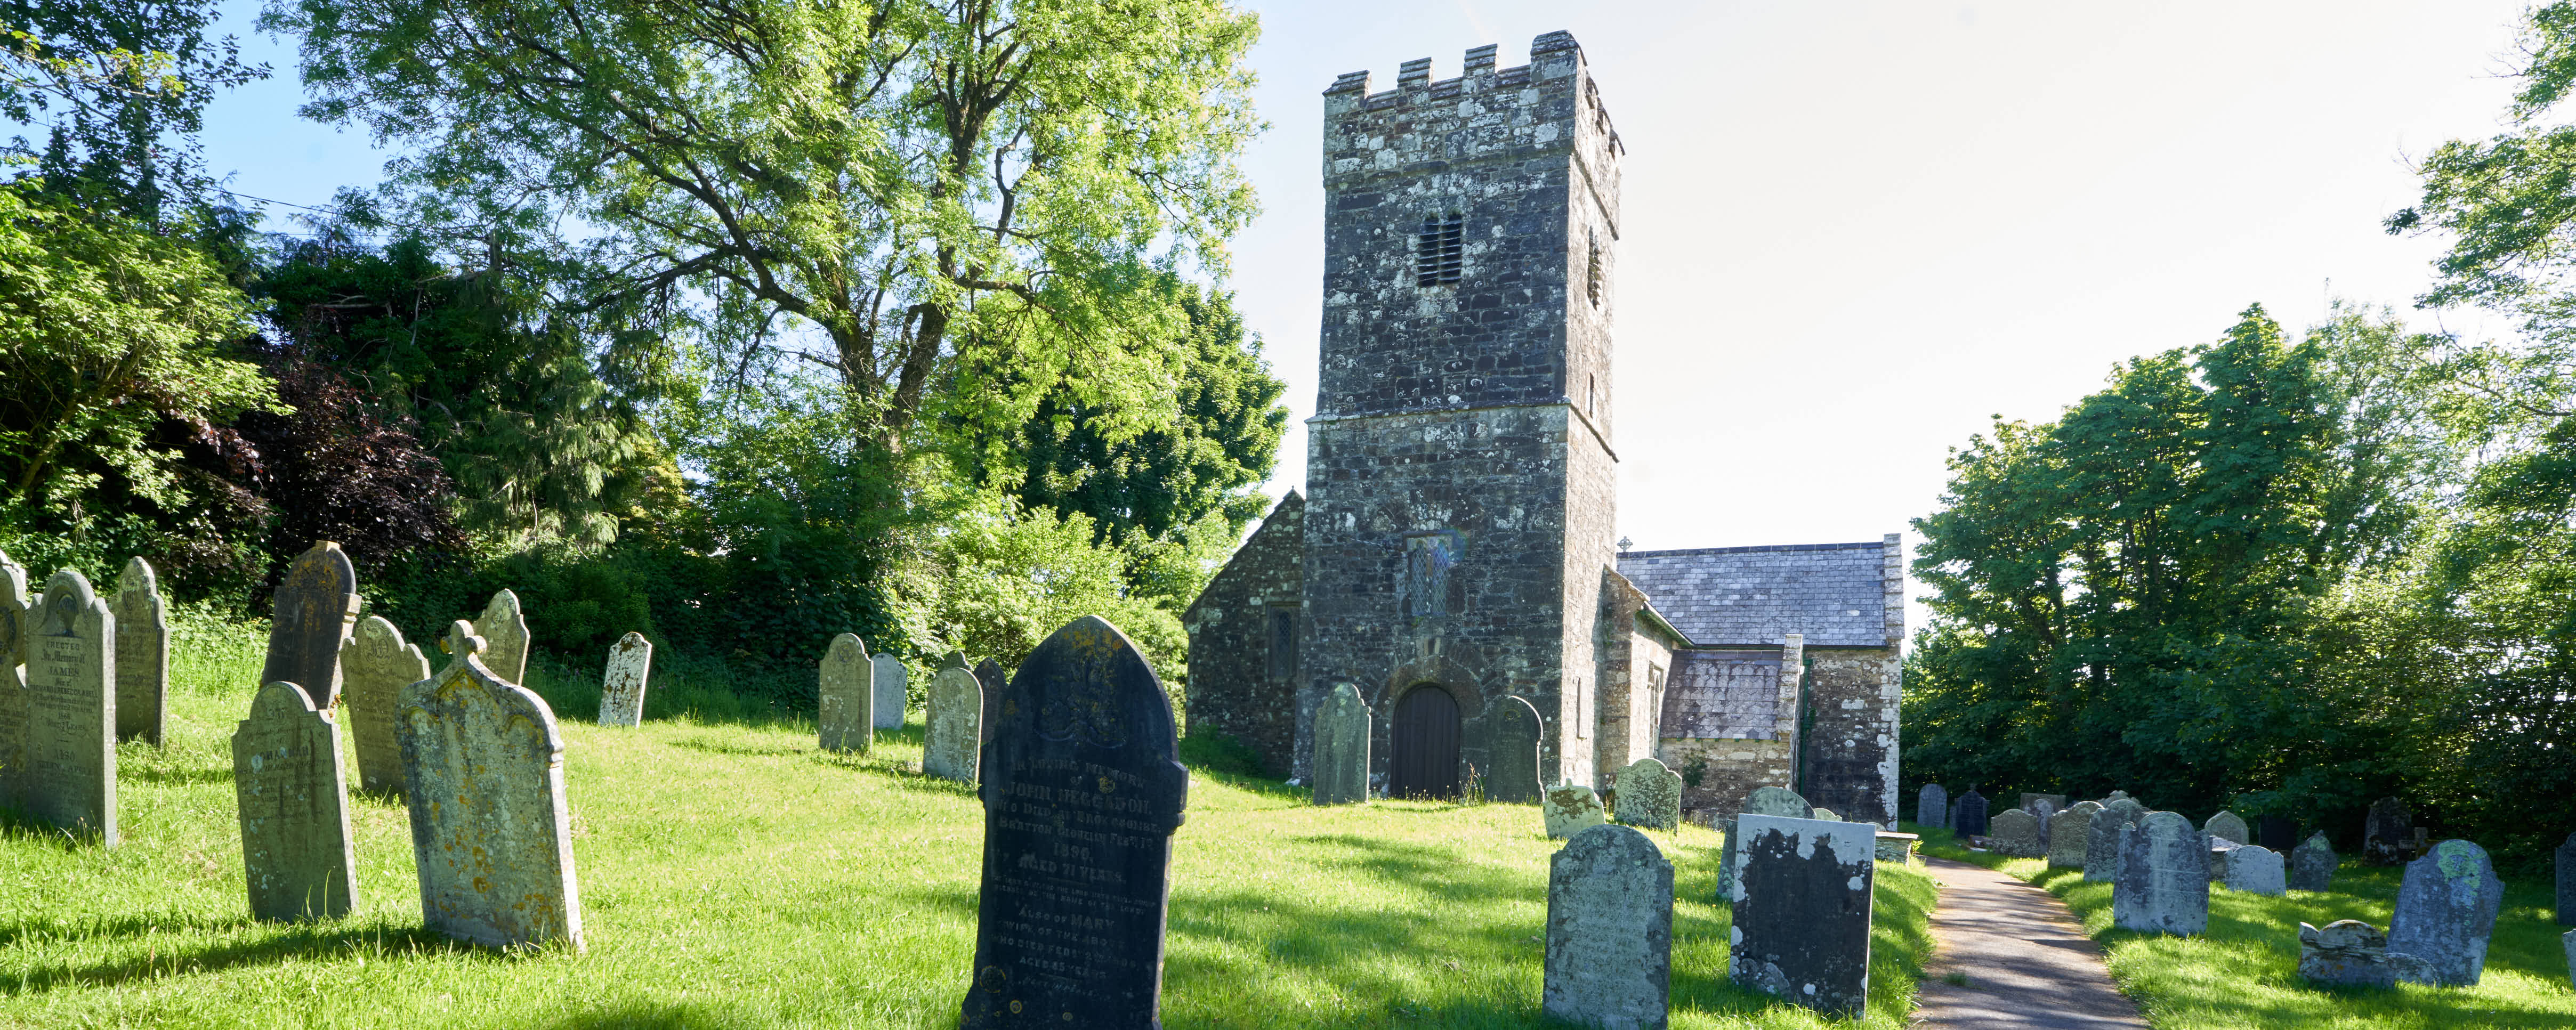 An old Norman church tower in a small grave yard